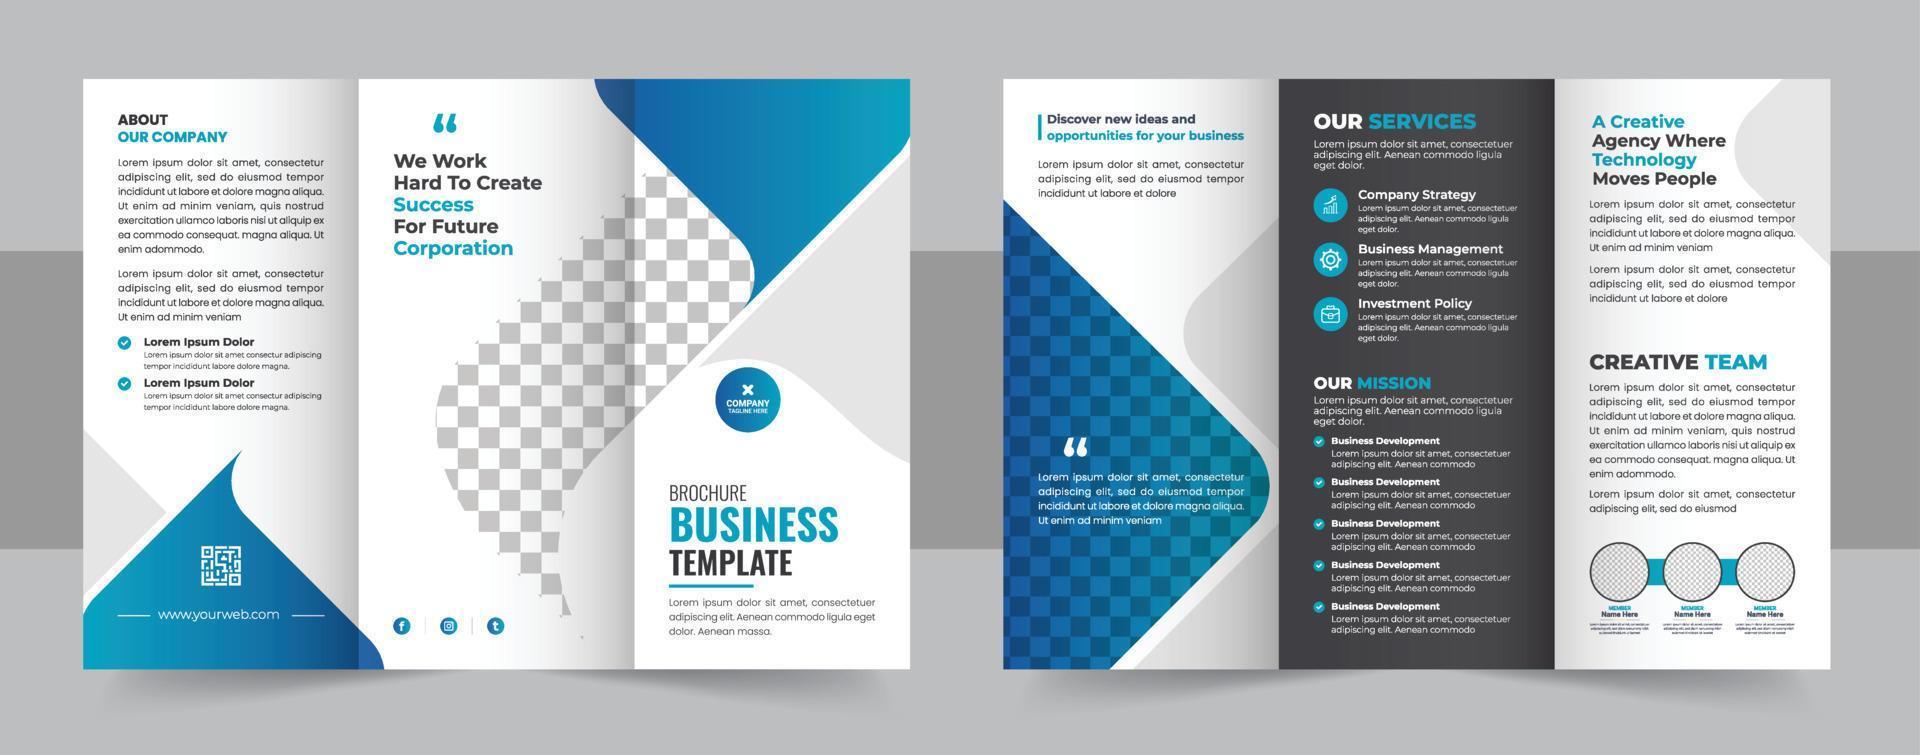 Corporate business trifold brochure template, Creative and Professional tri fold brochure vector design, Professional Brochure Template